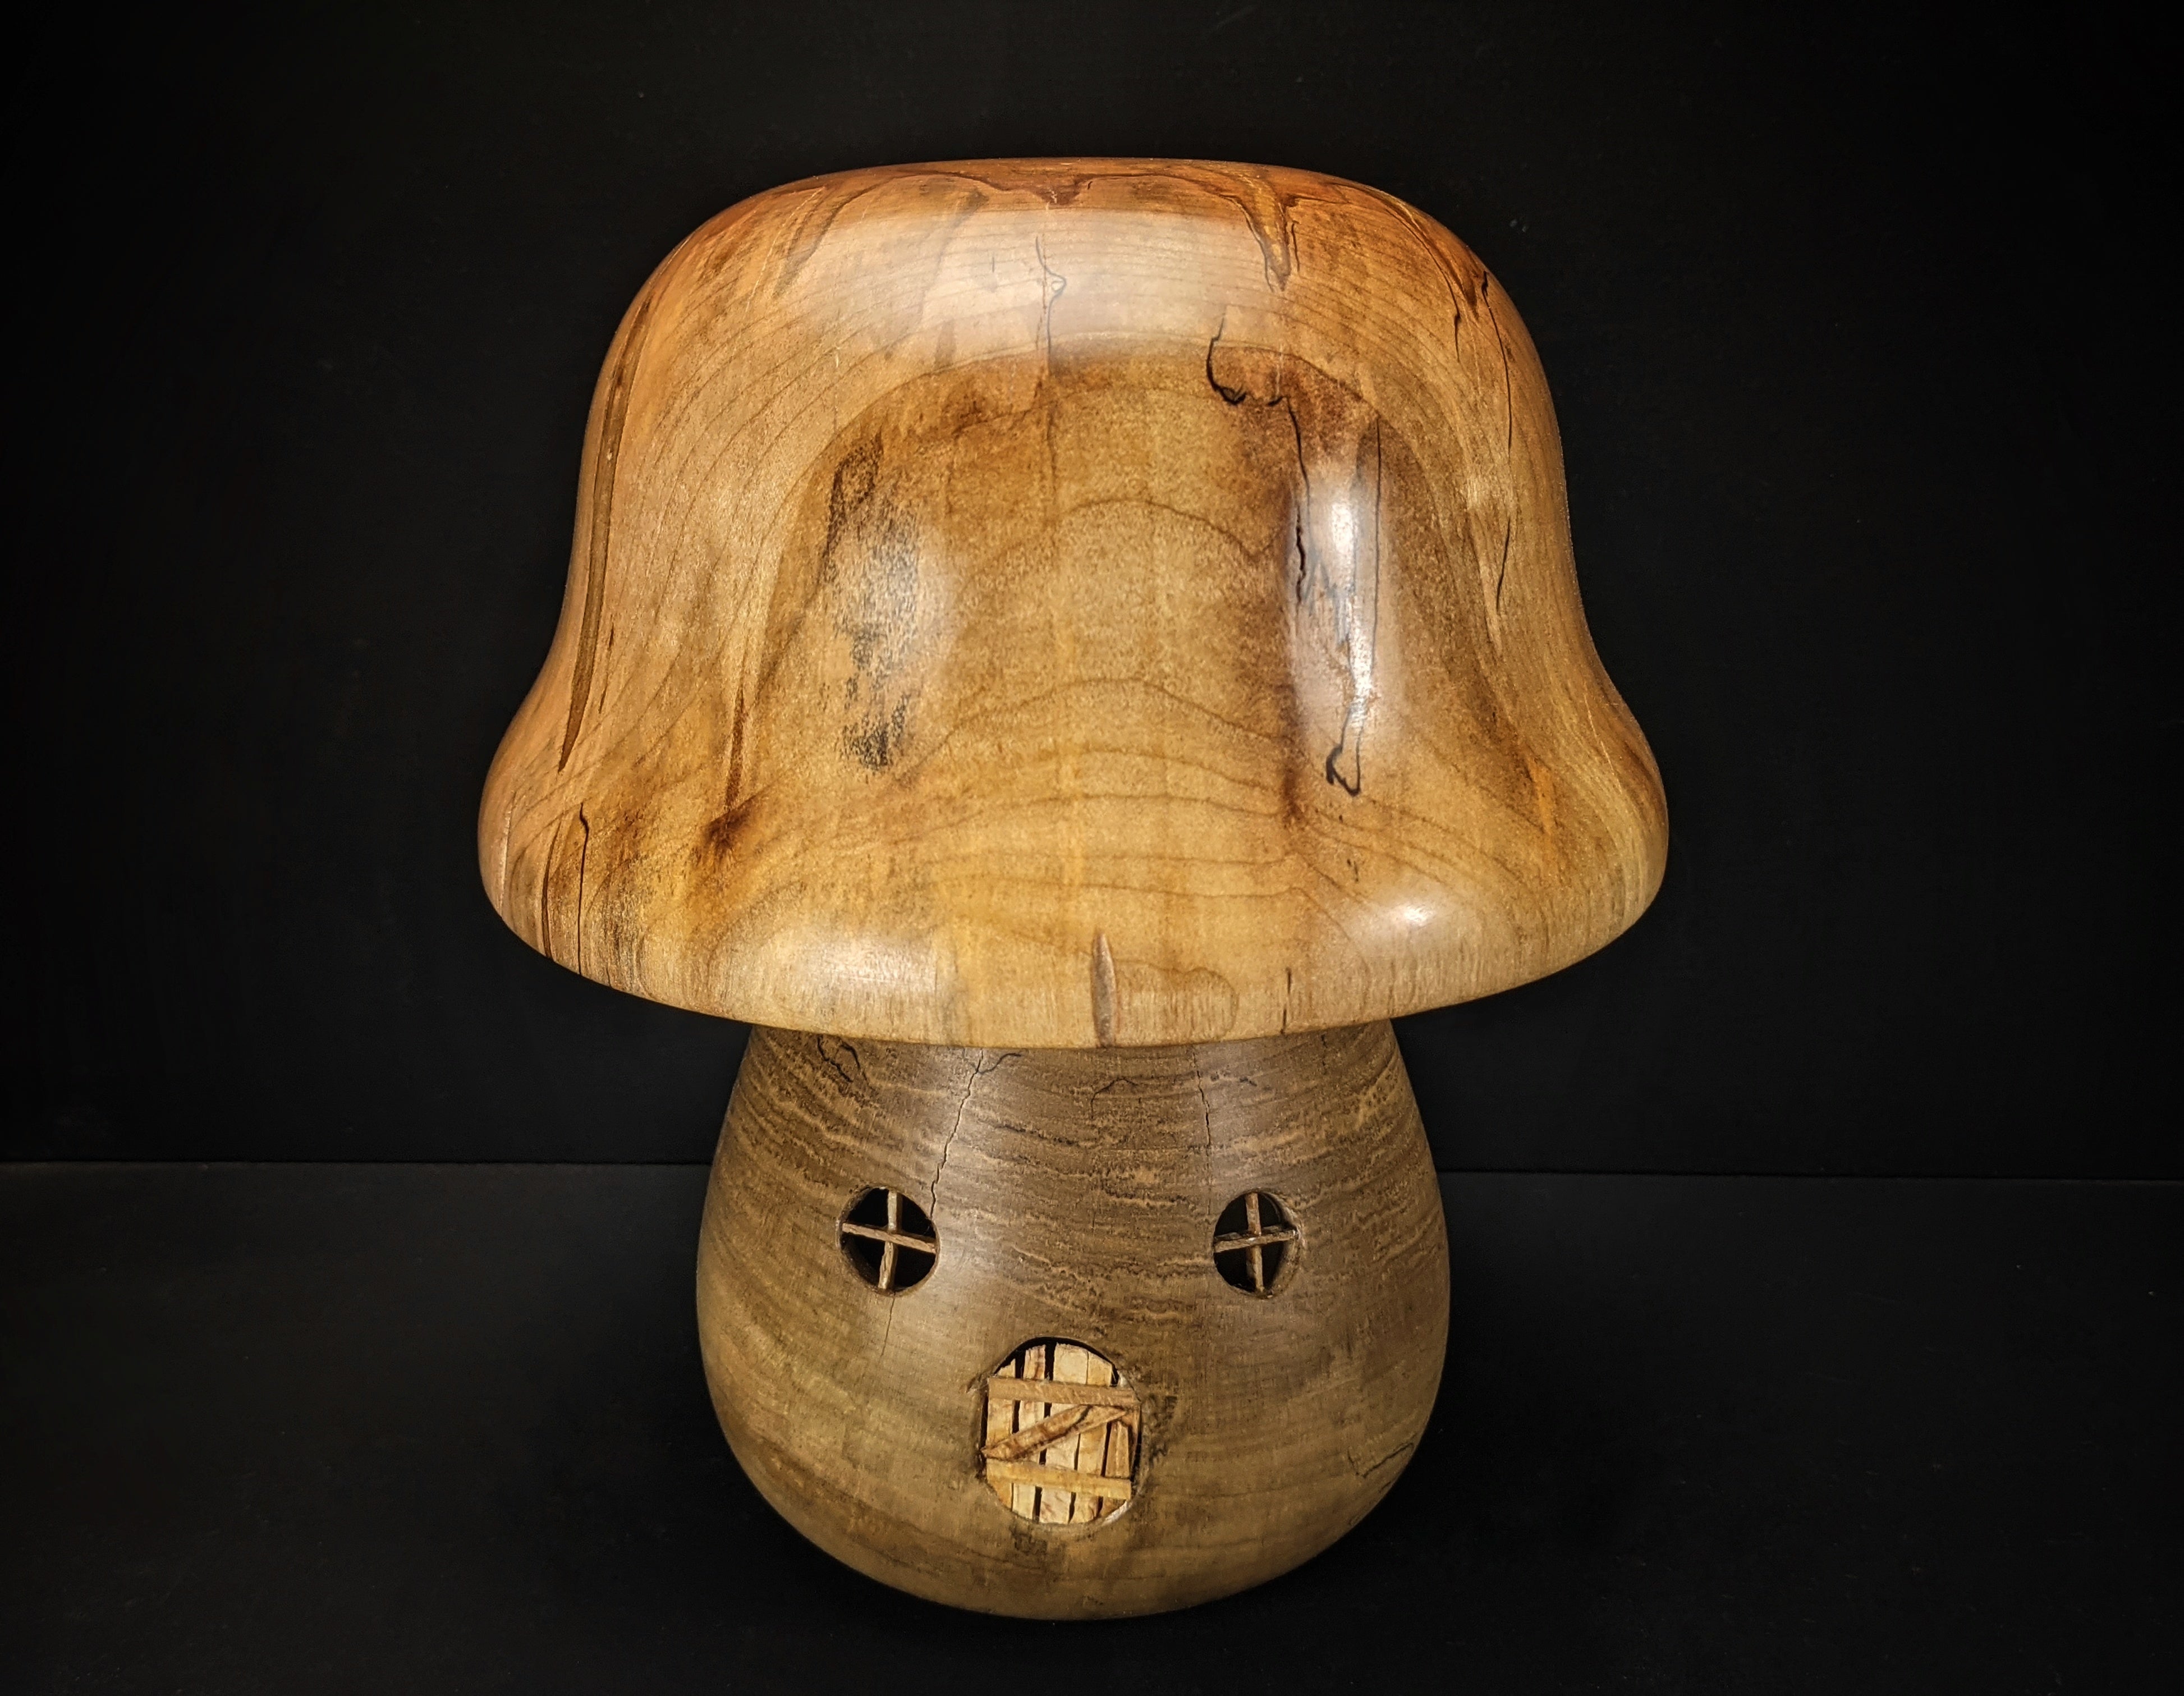 Ambrosia and spalted maple gnome home